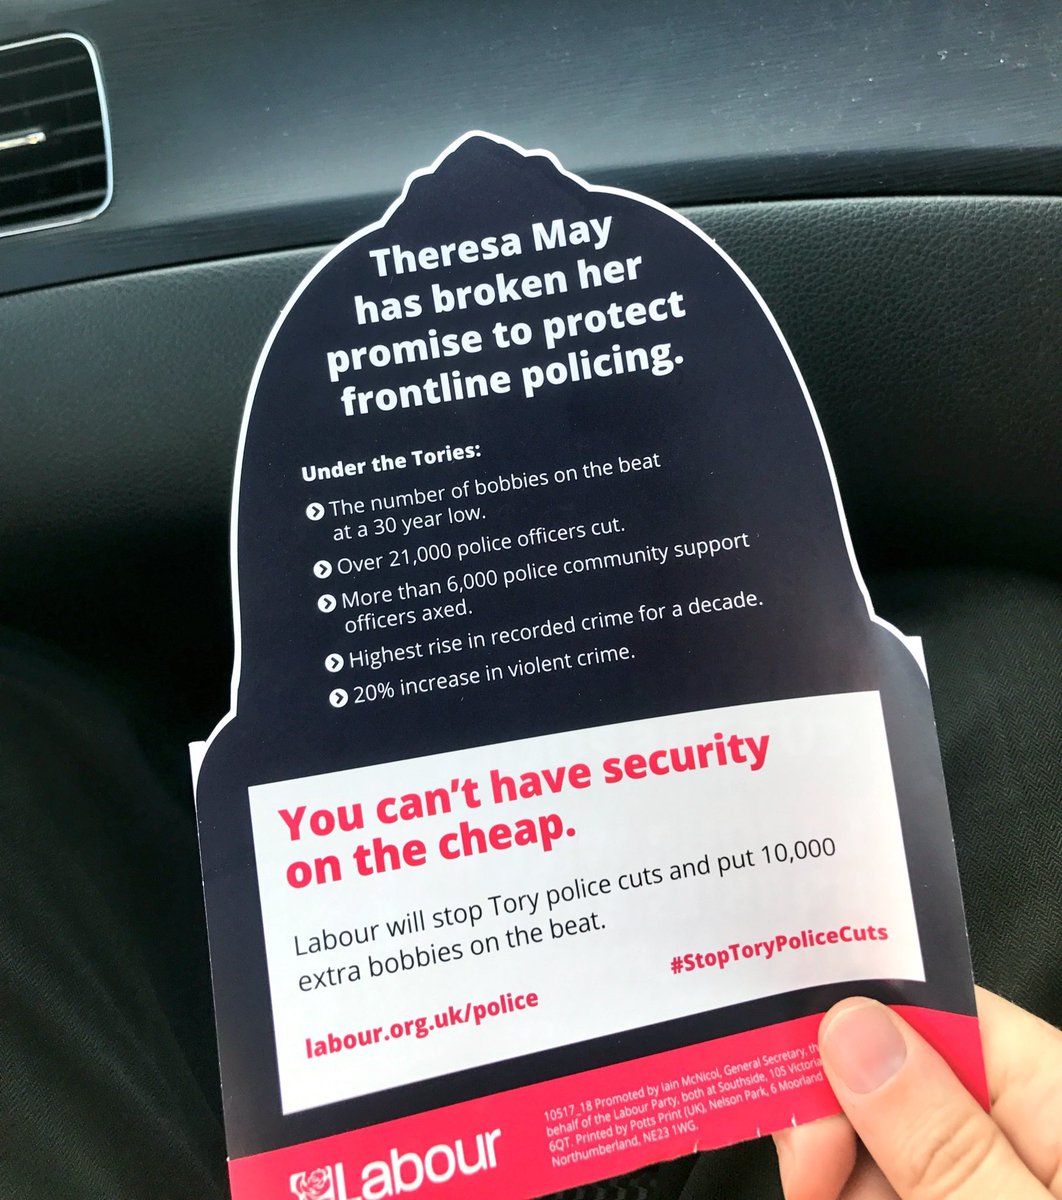 Joining @RichardBurgon and @MKLabourParty to knock doors and spread the word about @UKLabour’s efforts to #StopToryPoliceCuts